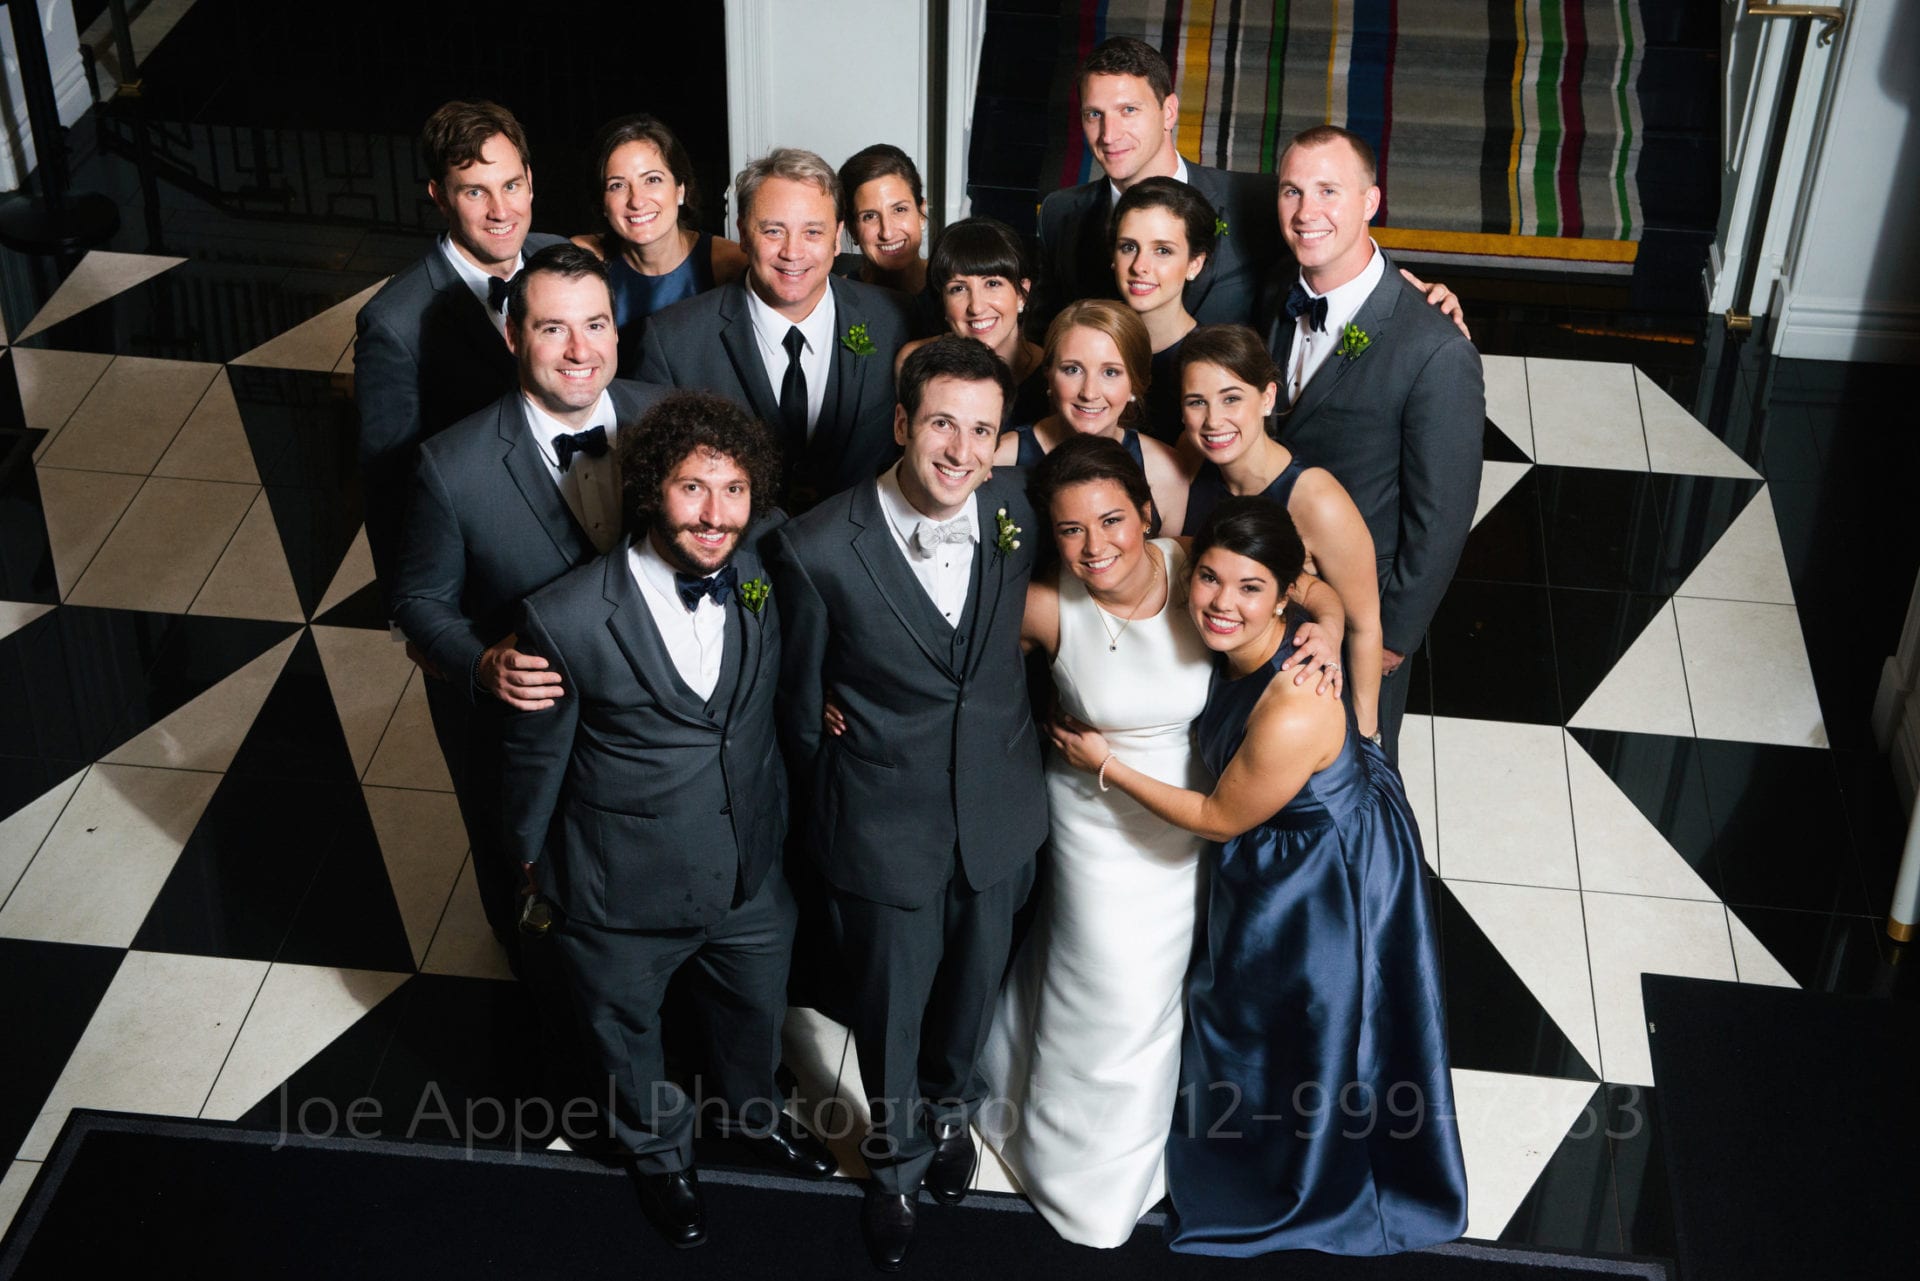 a bride and groom gather together with their wedding party on a black and white checkered floor